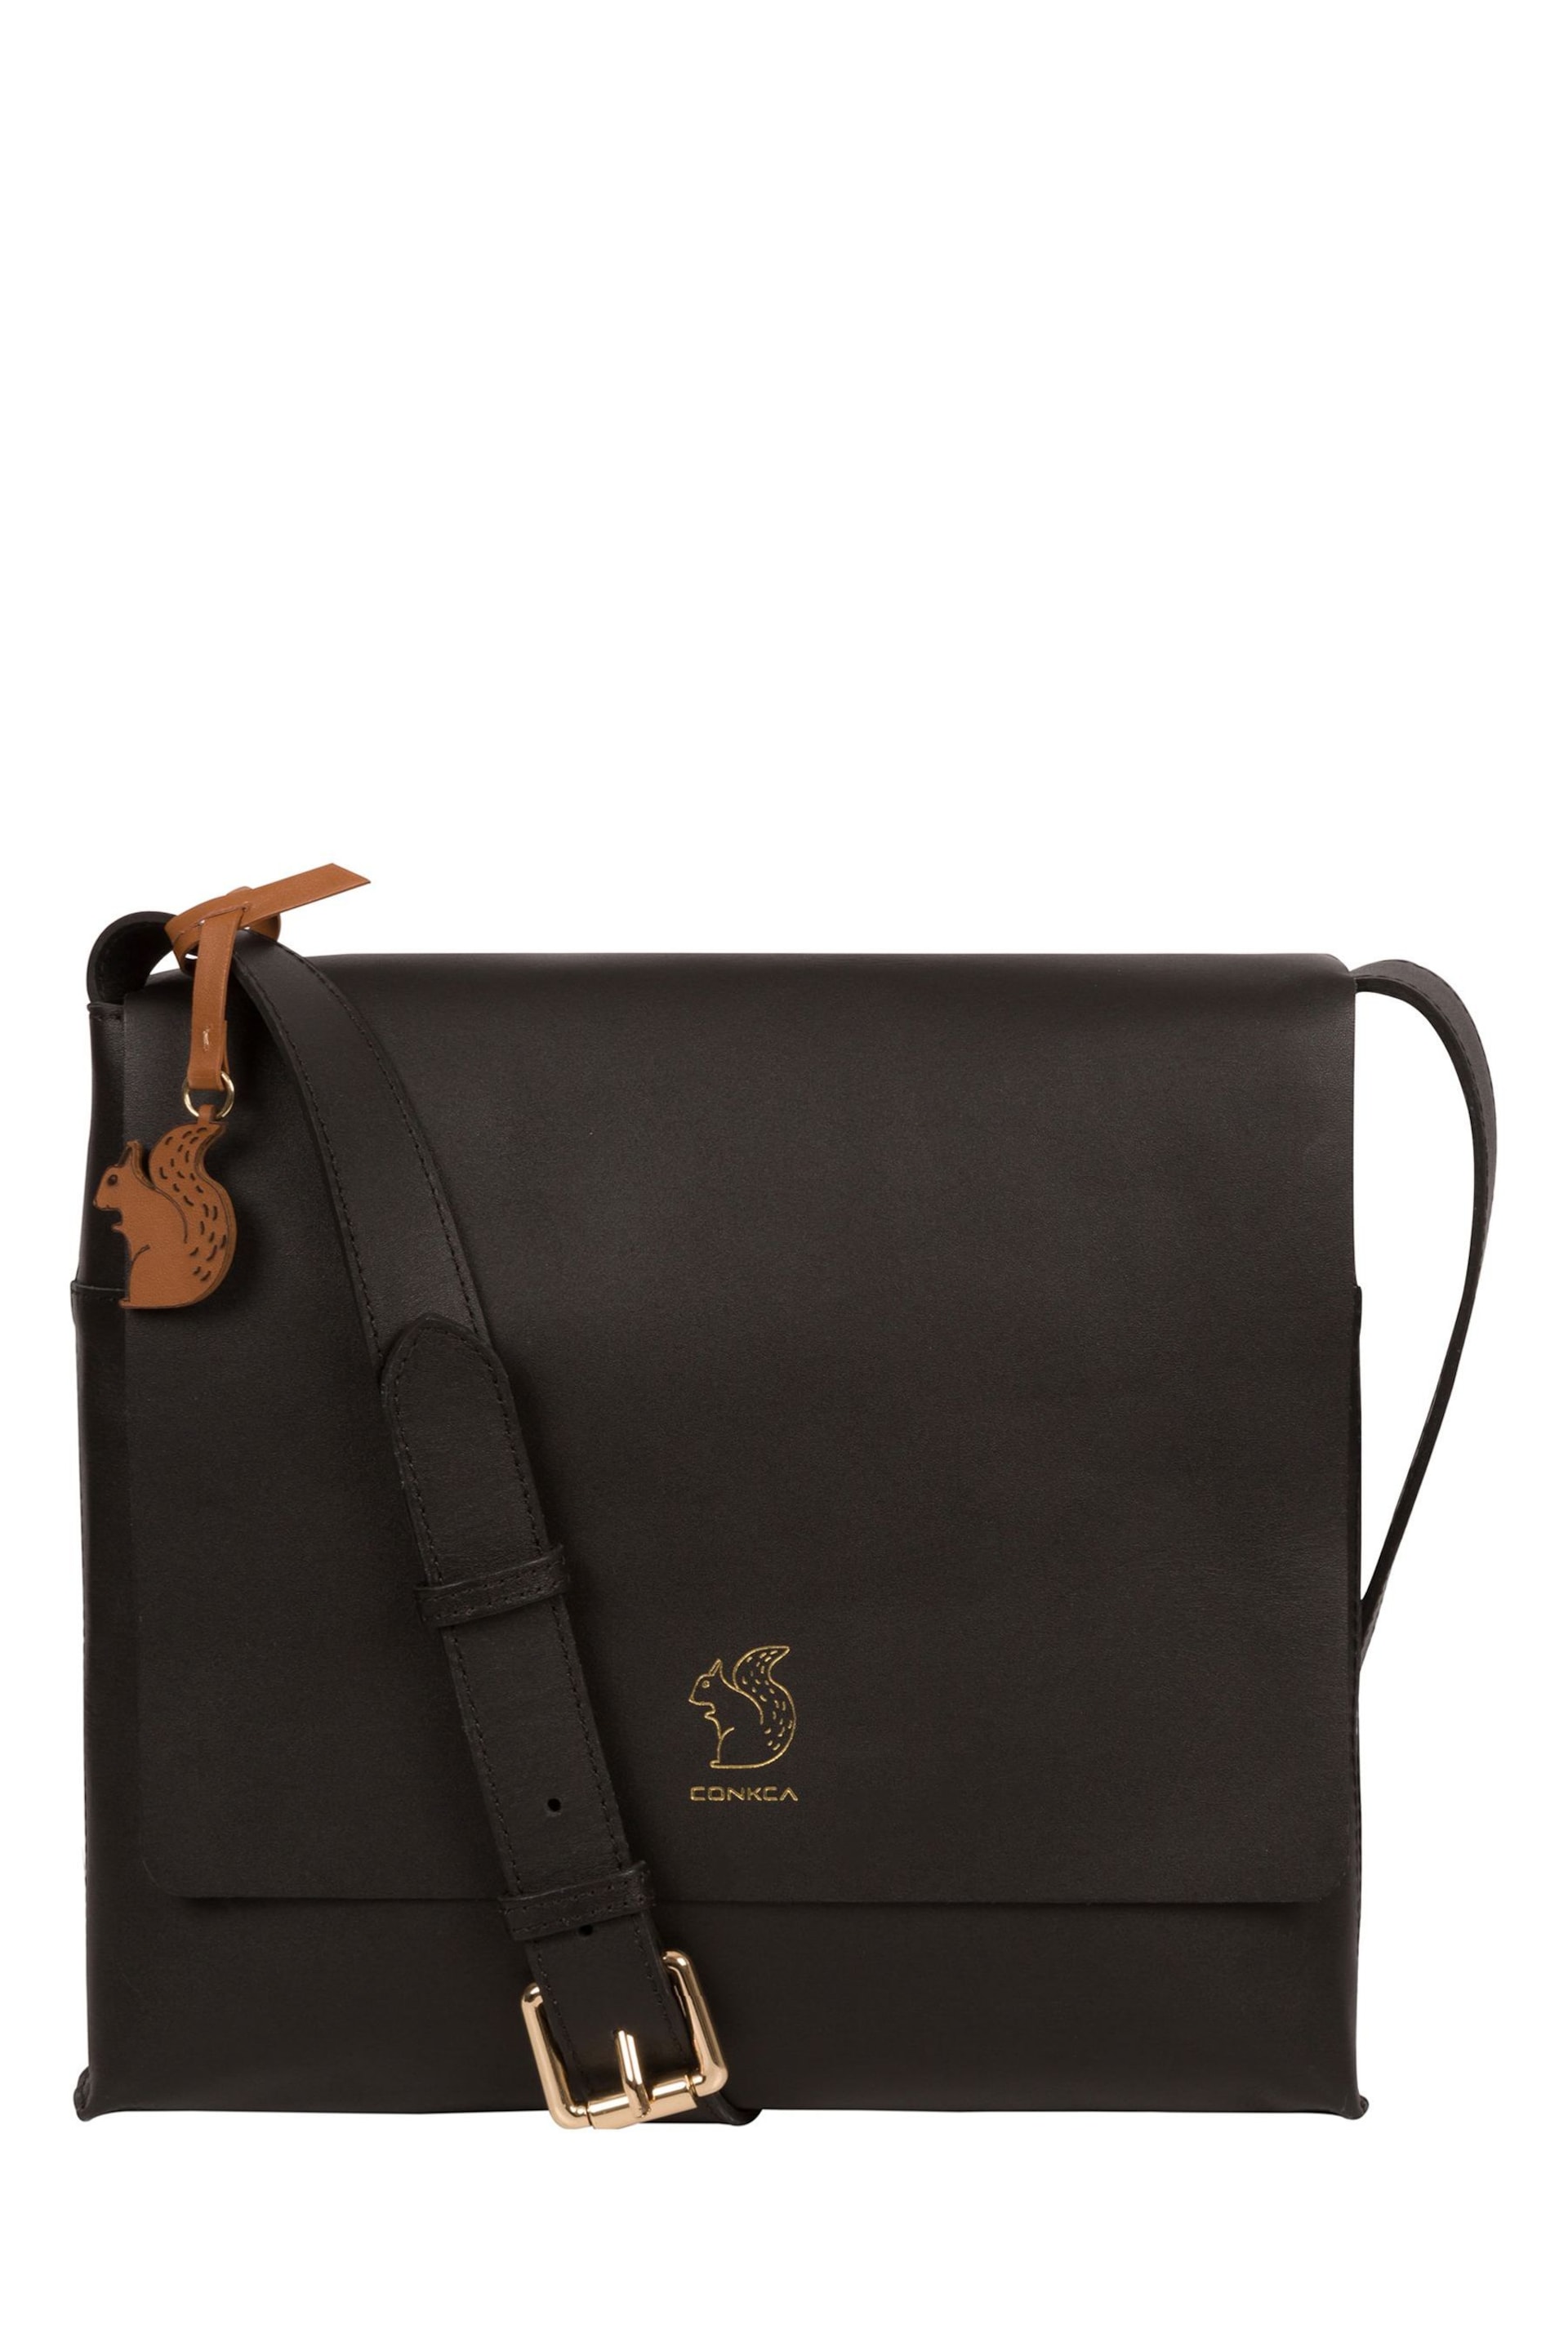 Conkca Bale Vegetable-Tanned Leather Cross-Body Bag - Image 1 of 5